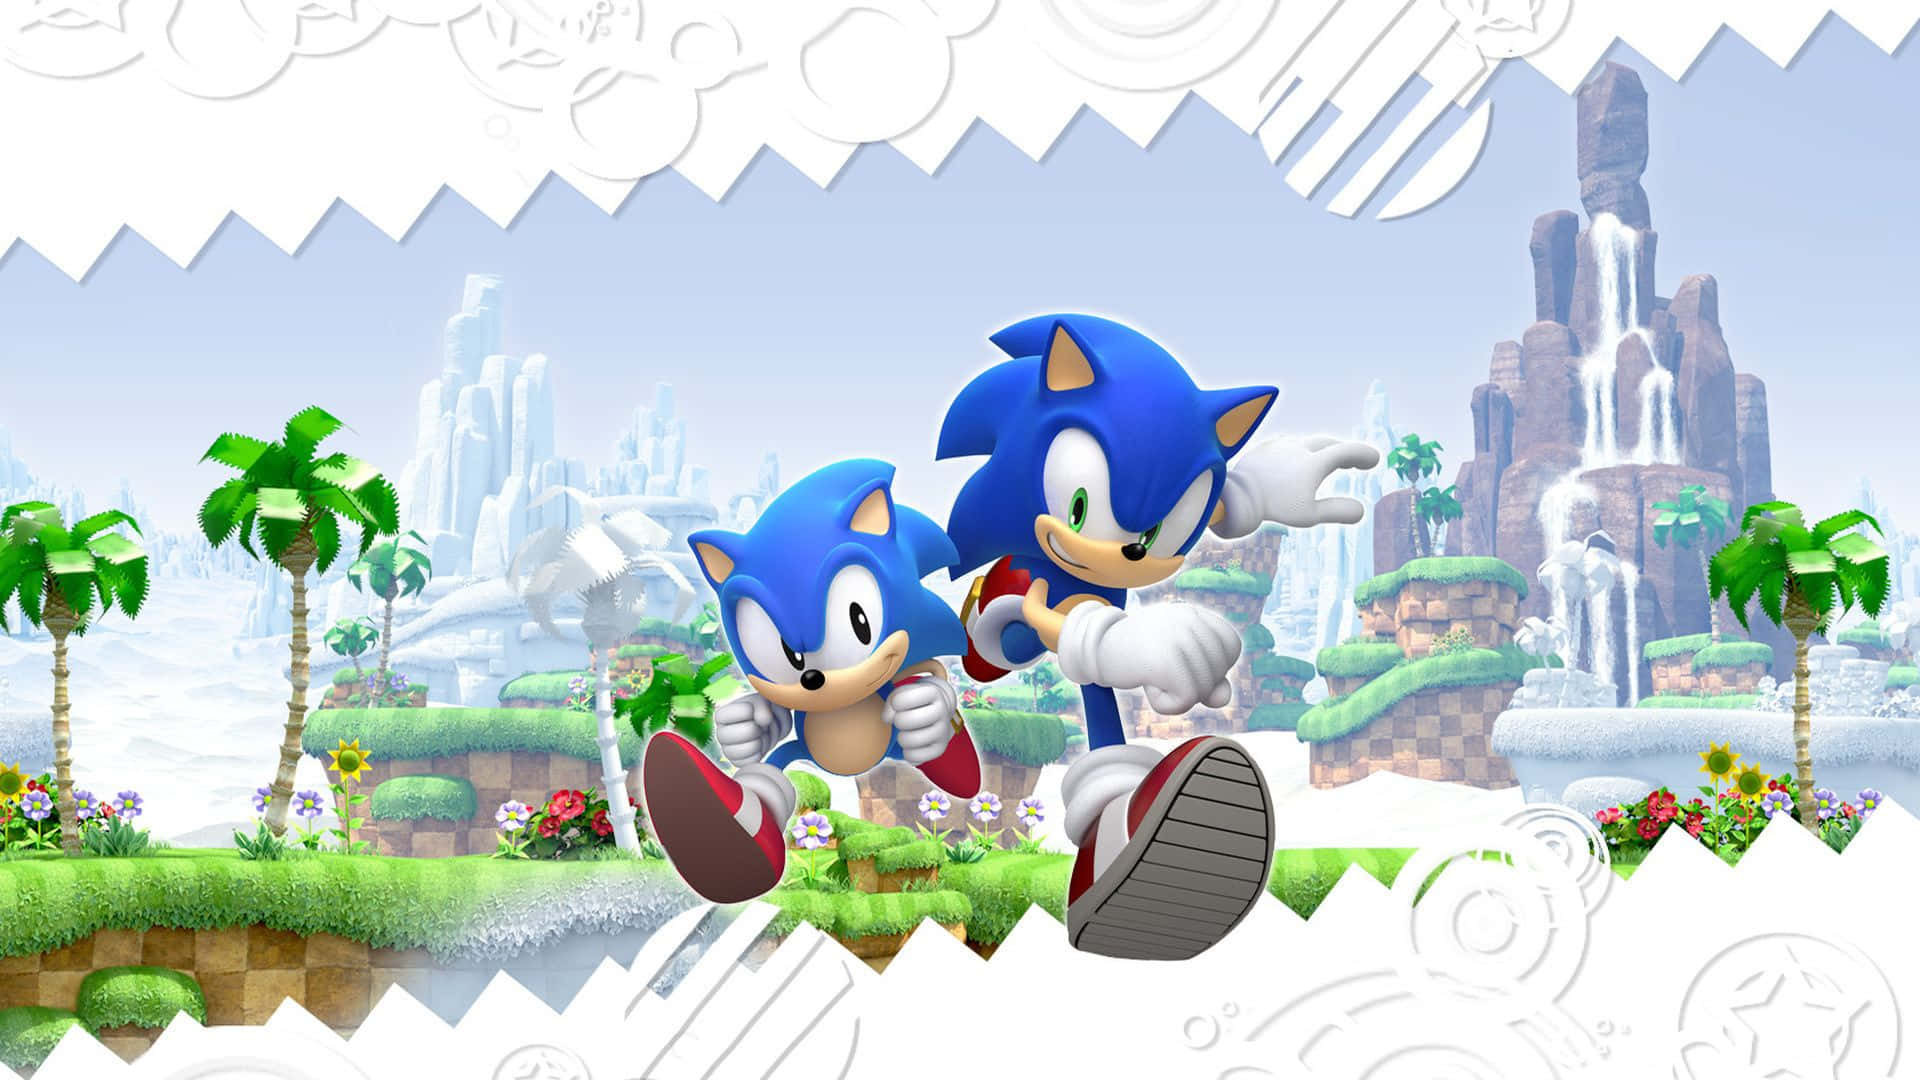 Wallpaper ID 462232  Video Game Sonic Generations Phone Wallpaper Sonic  The Hedgehog 720x1280 free download